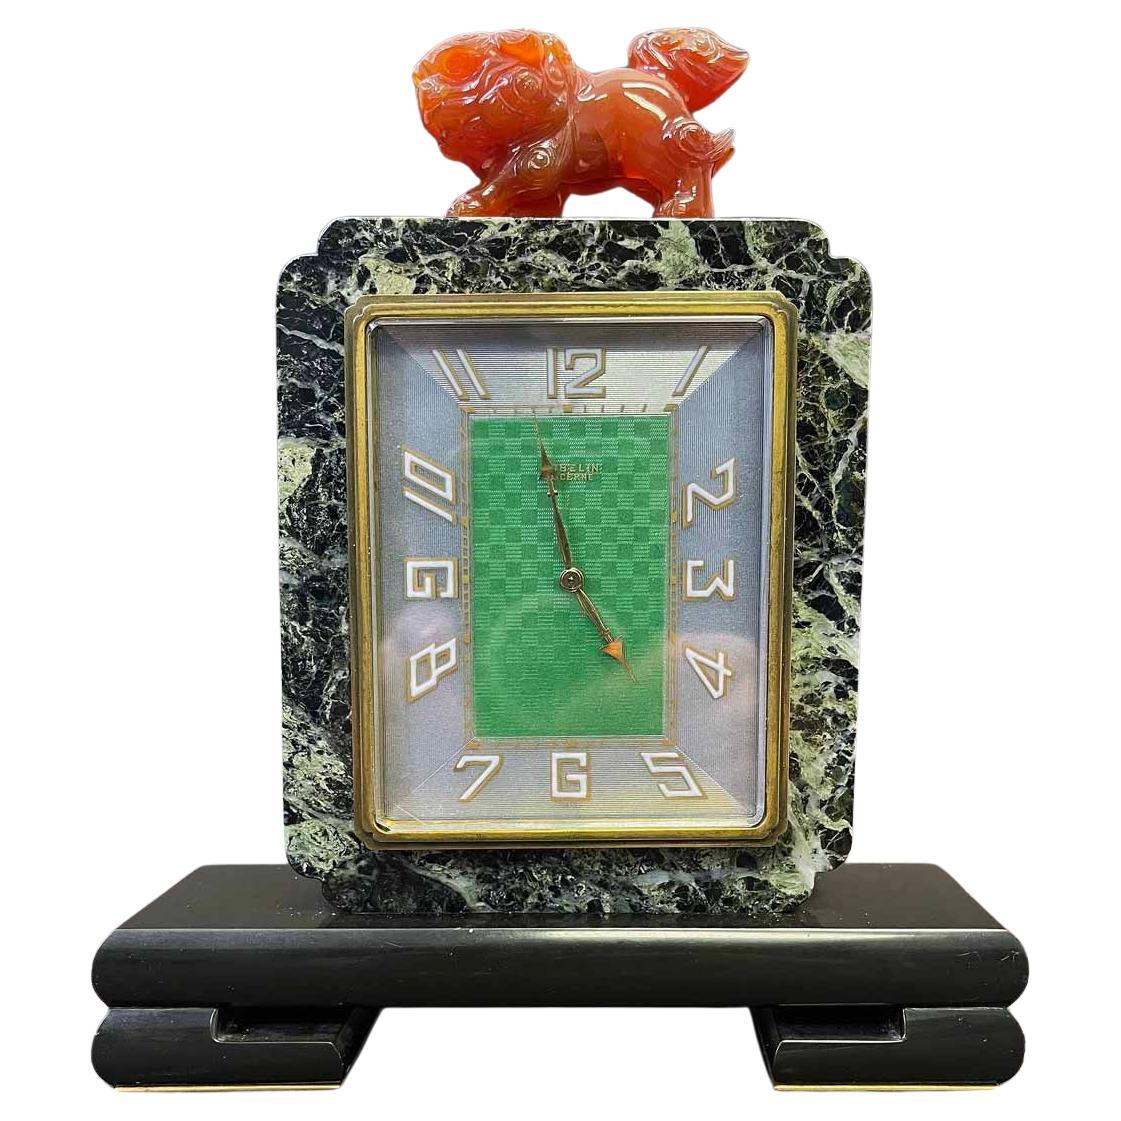 "Art Deco Clock in Chinese Manner", Gübelin Clock w/ Red Hardstone Finial For Sale